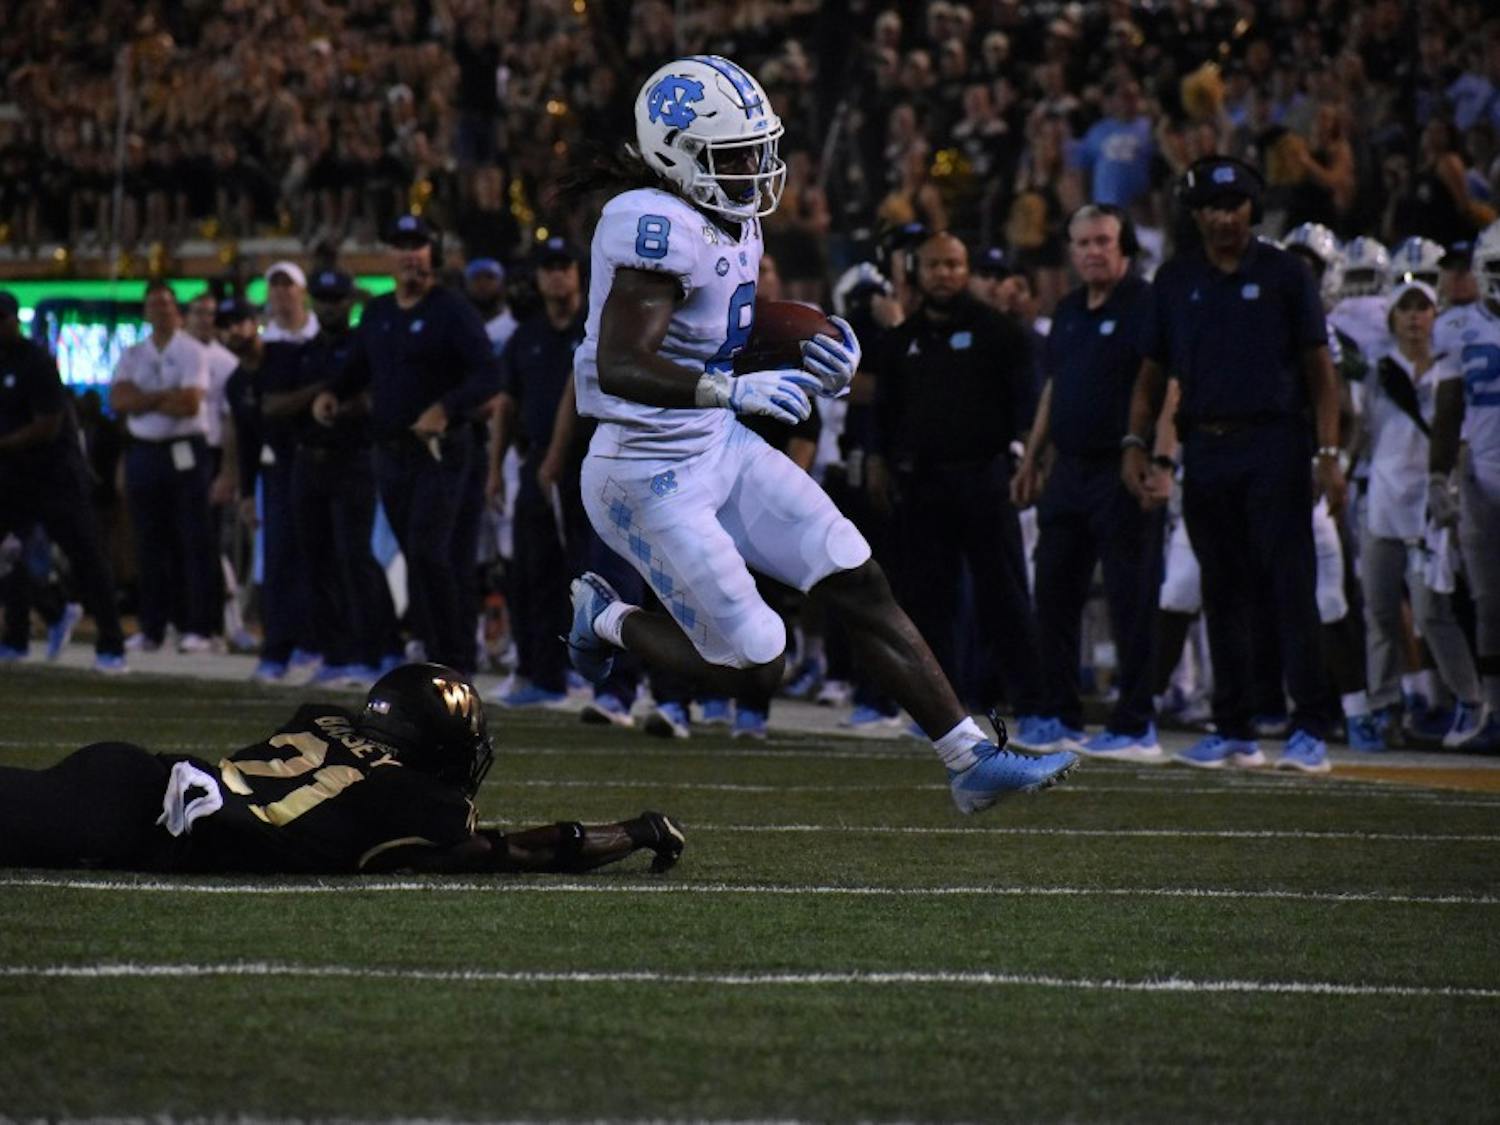 UNC-CH junior running back Michael Carter (#8) running the football in the loss against Wake Forest. 